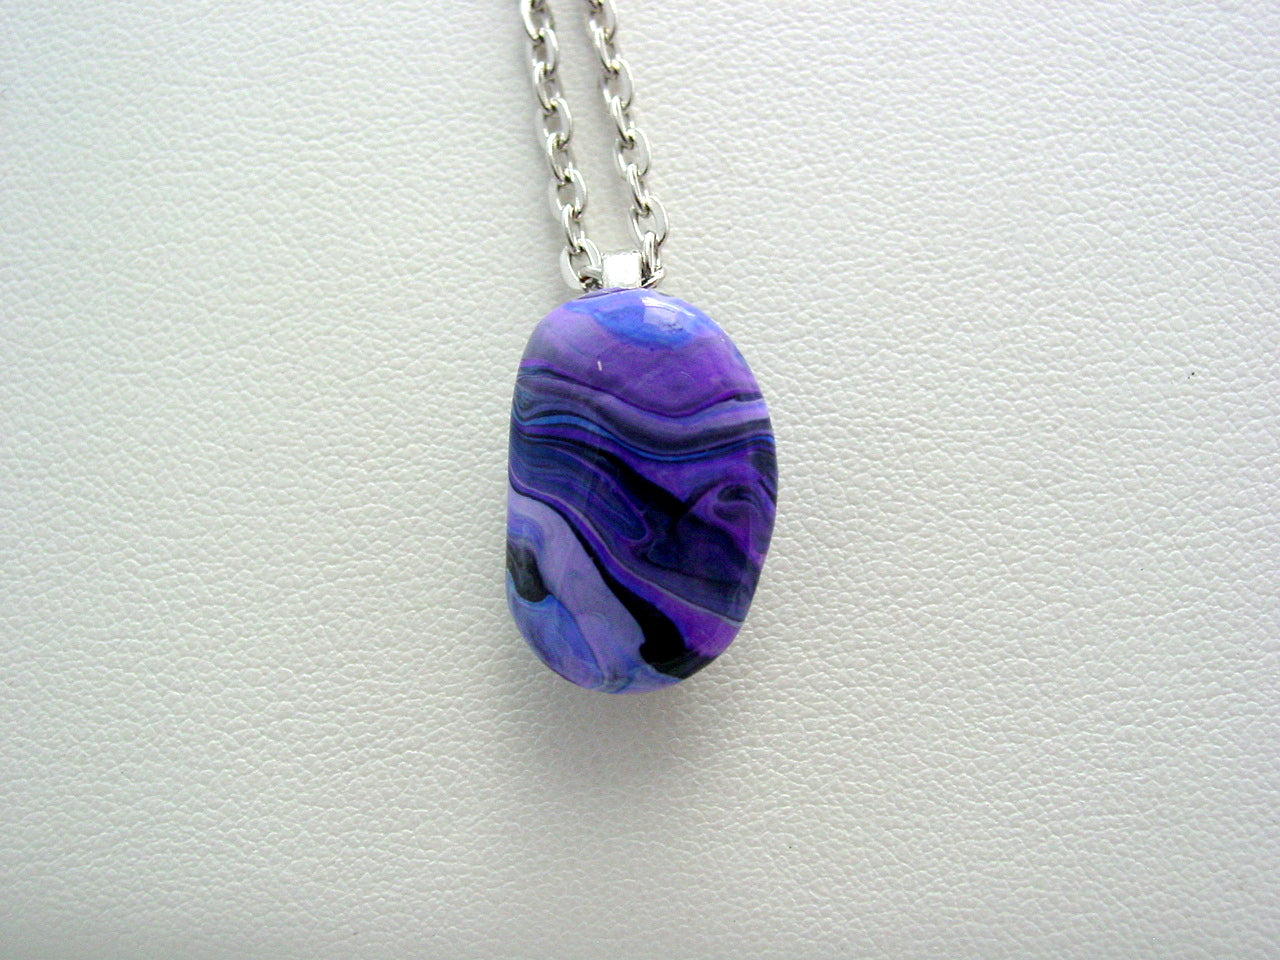 River Rock Jewelry Purple Wearable Fluid Art Necklace Original Alaskan Rock Organic Jewelry Dirty Pour Necklace With Chain (rr25)